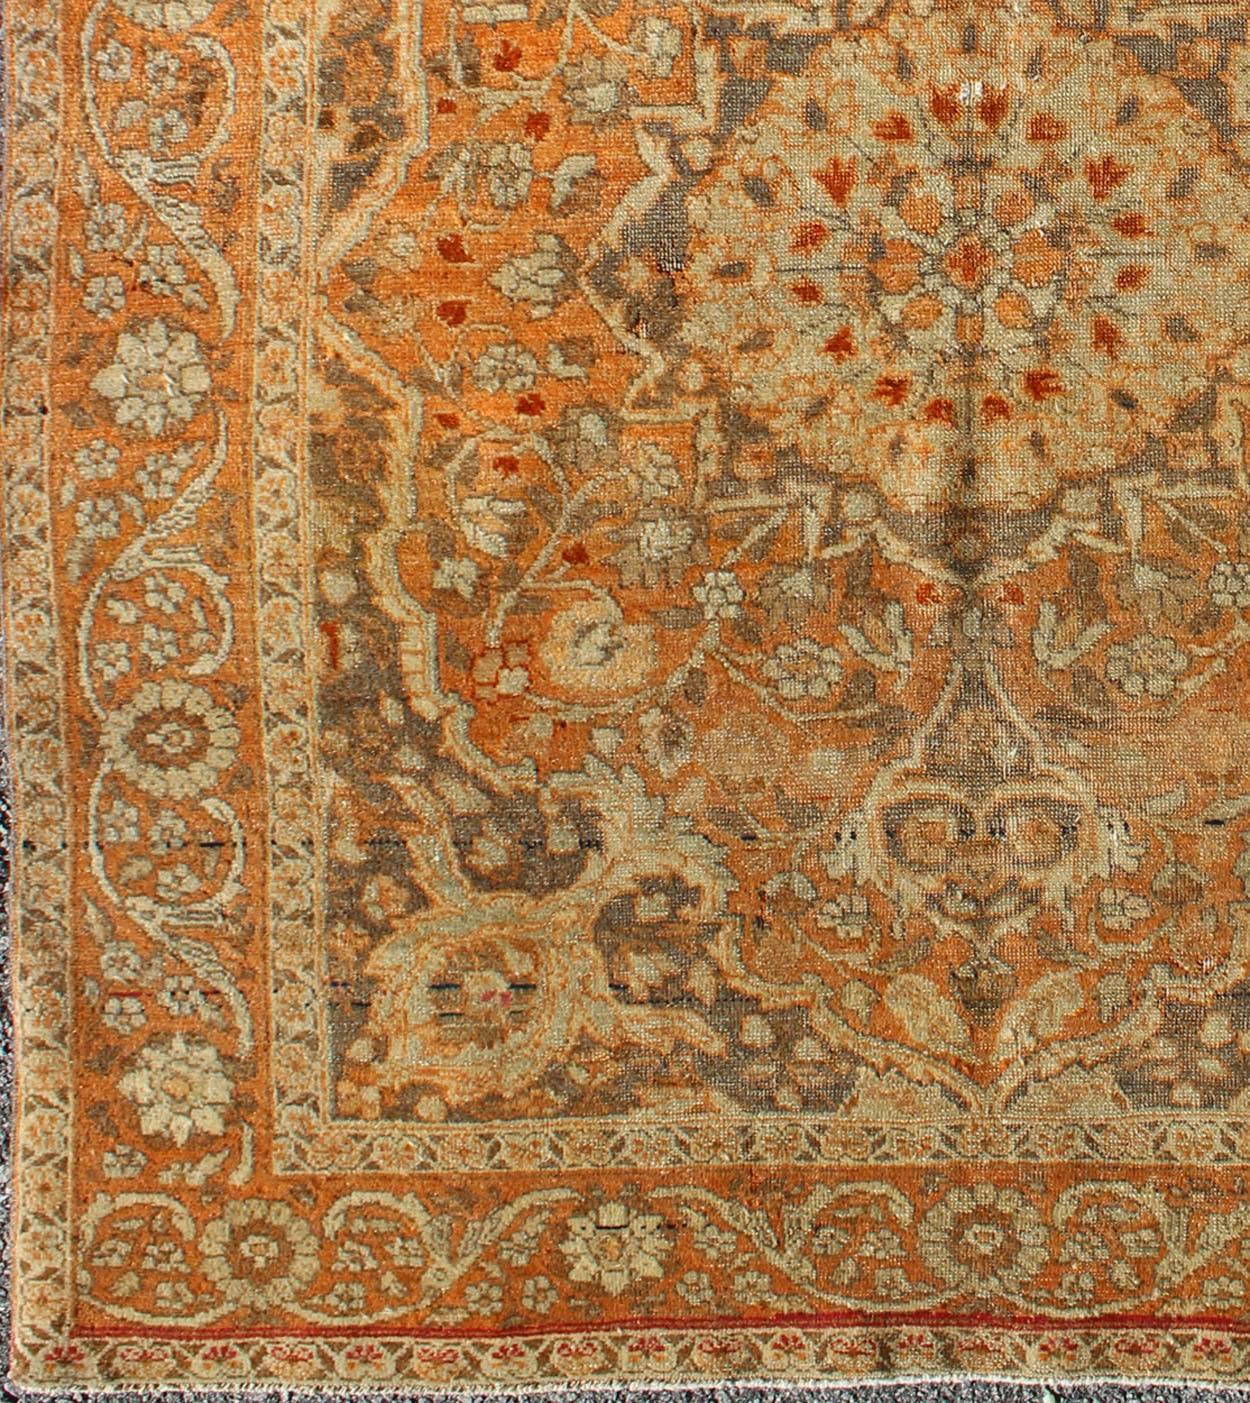 Antique Persian Tabriz Haji Jalili with in Light Orange and light brown

This magnificent antique Persian Tabriz carpet from late 19th century Iran was created by the master weaver Haj-Jalili. Featuring a large and ornate central medallion flanked